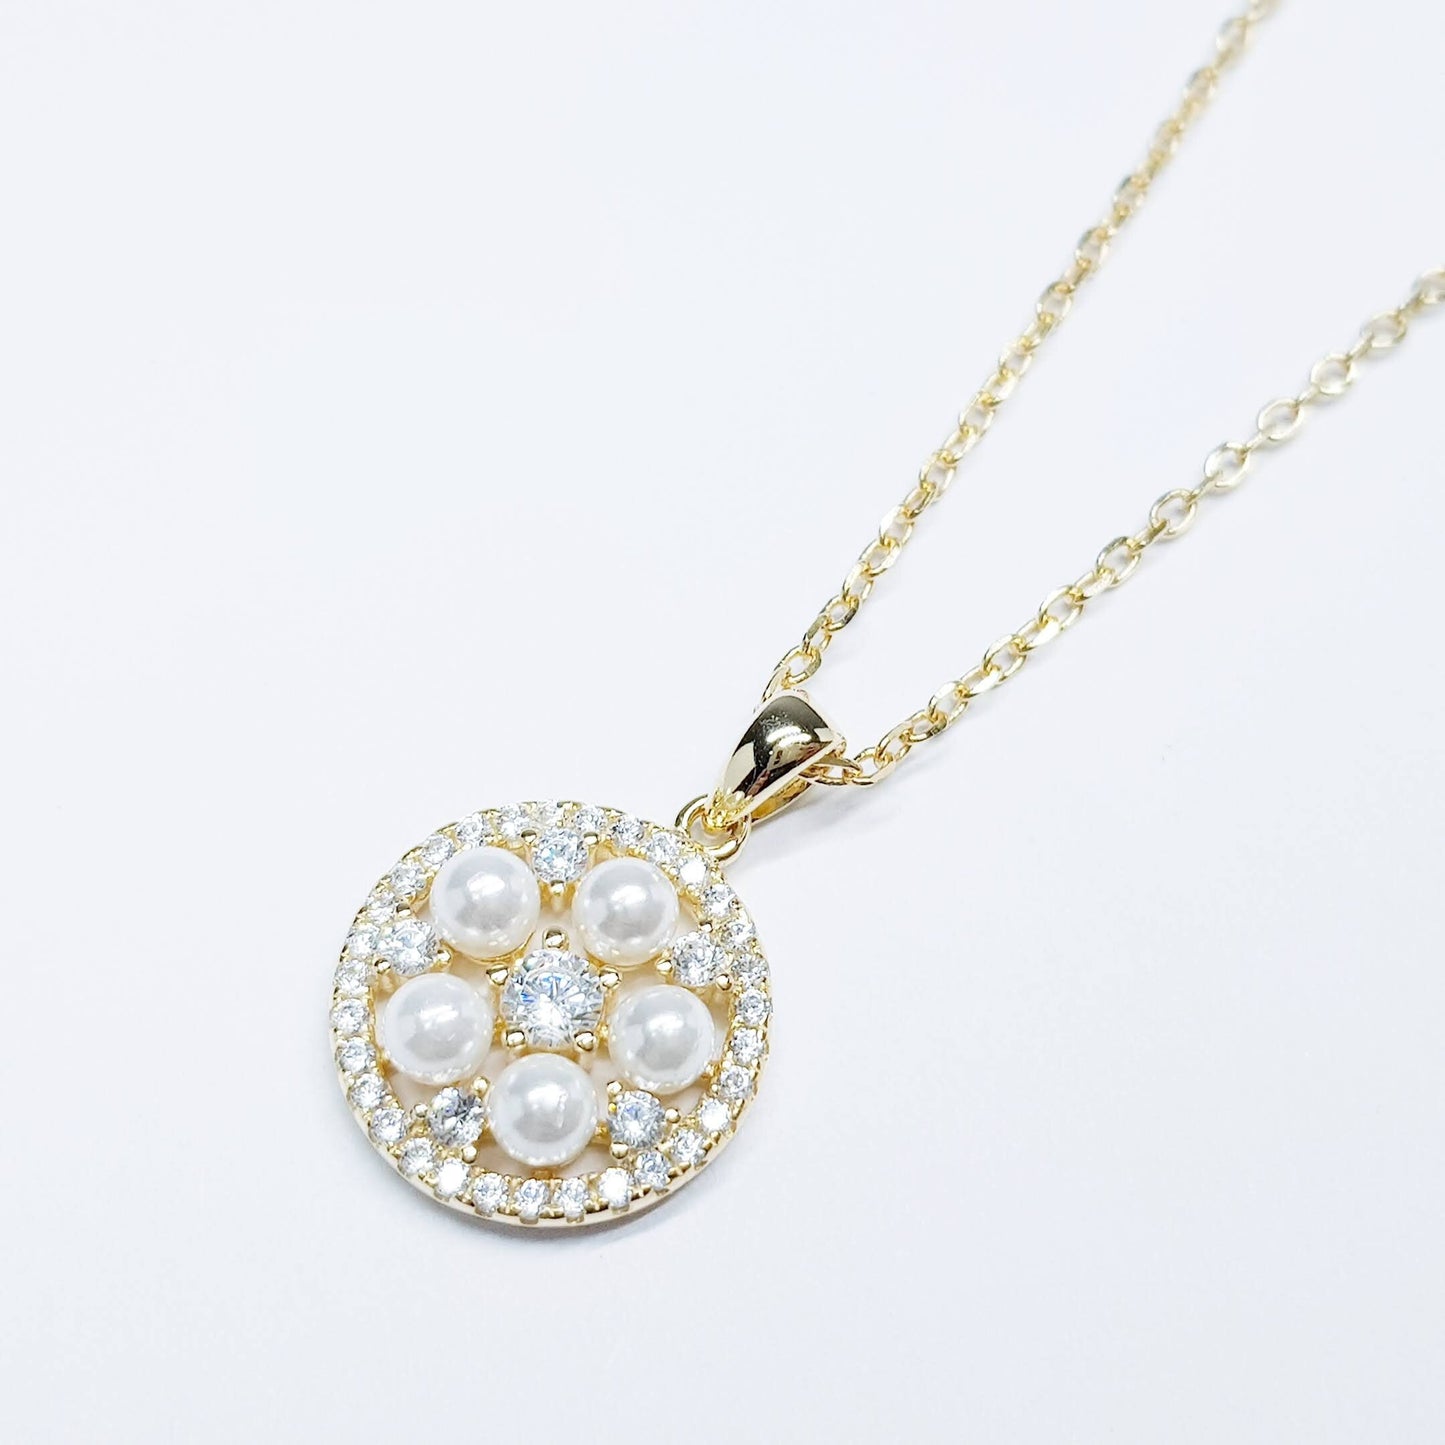 Vintage style gold pearl pendant - elegant sterling silver pearl necklace